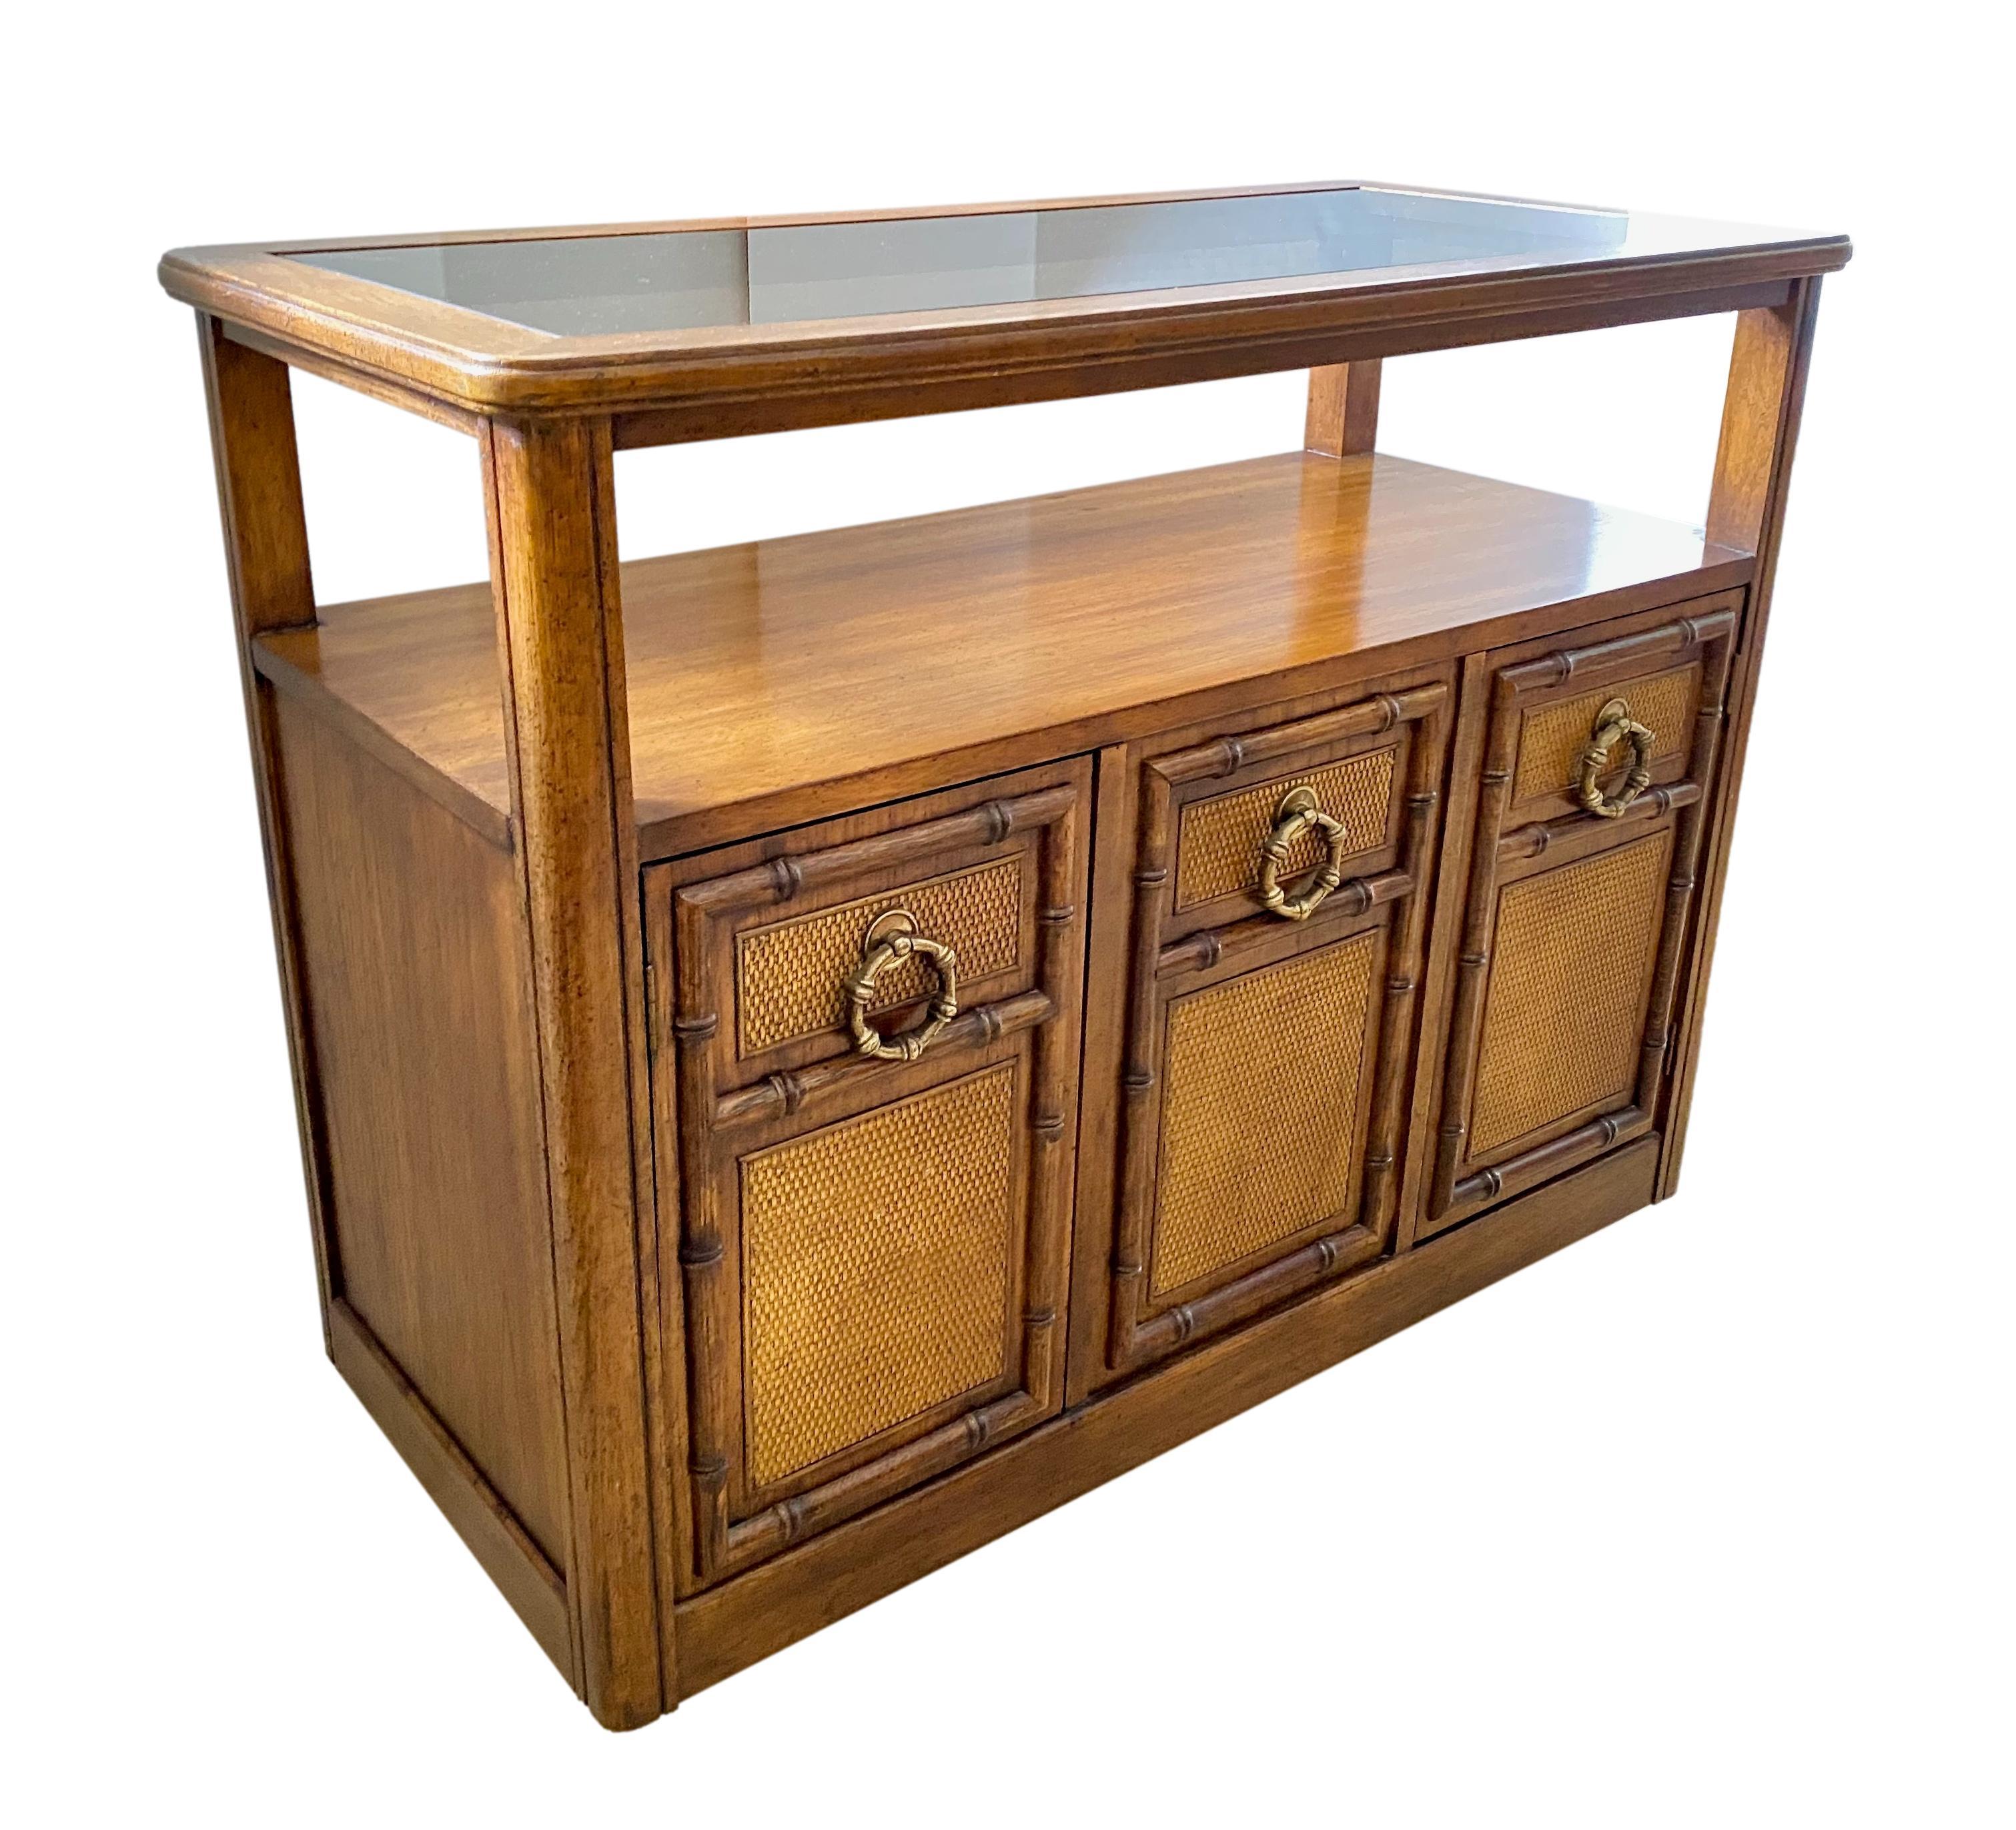 A 1970s Hollywood Regency style console table and two-door storage cabinet on casters, attributed to American of Martinsville. Wood construction with inset smoked glass top, carved faux bamboo accents, woven reed paneled cabinet doors and bamboo